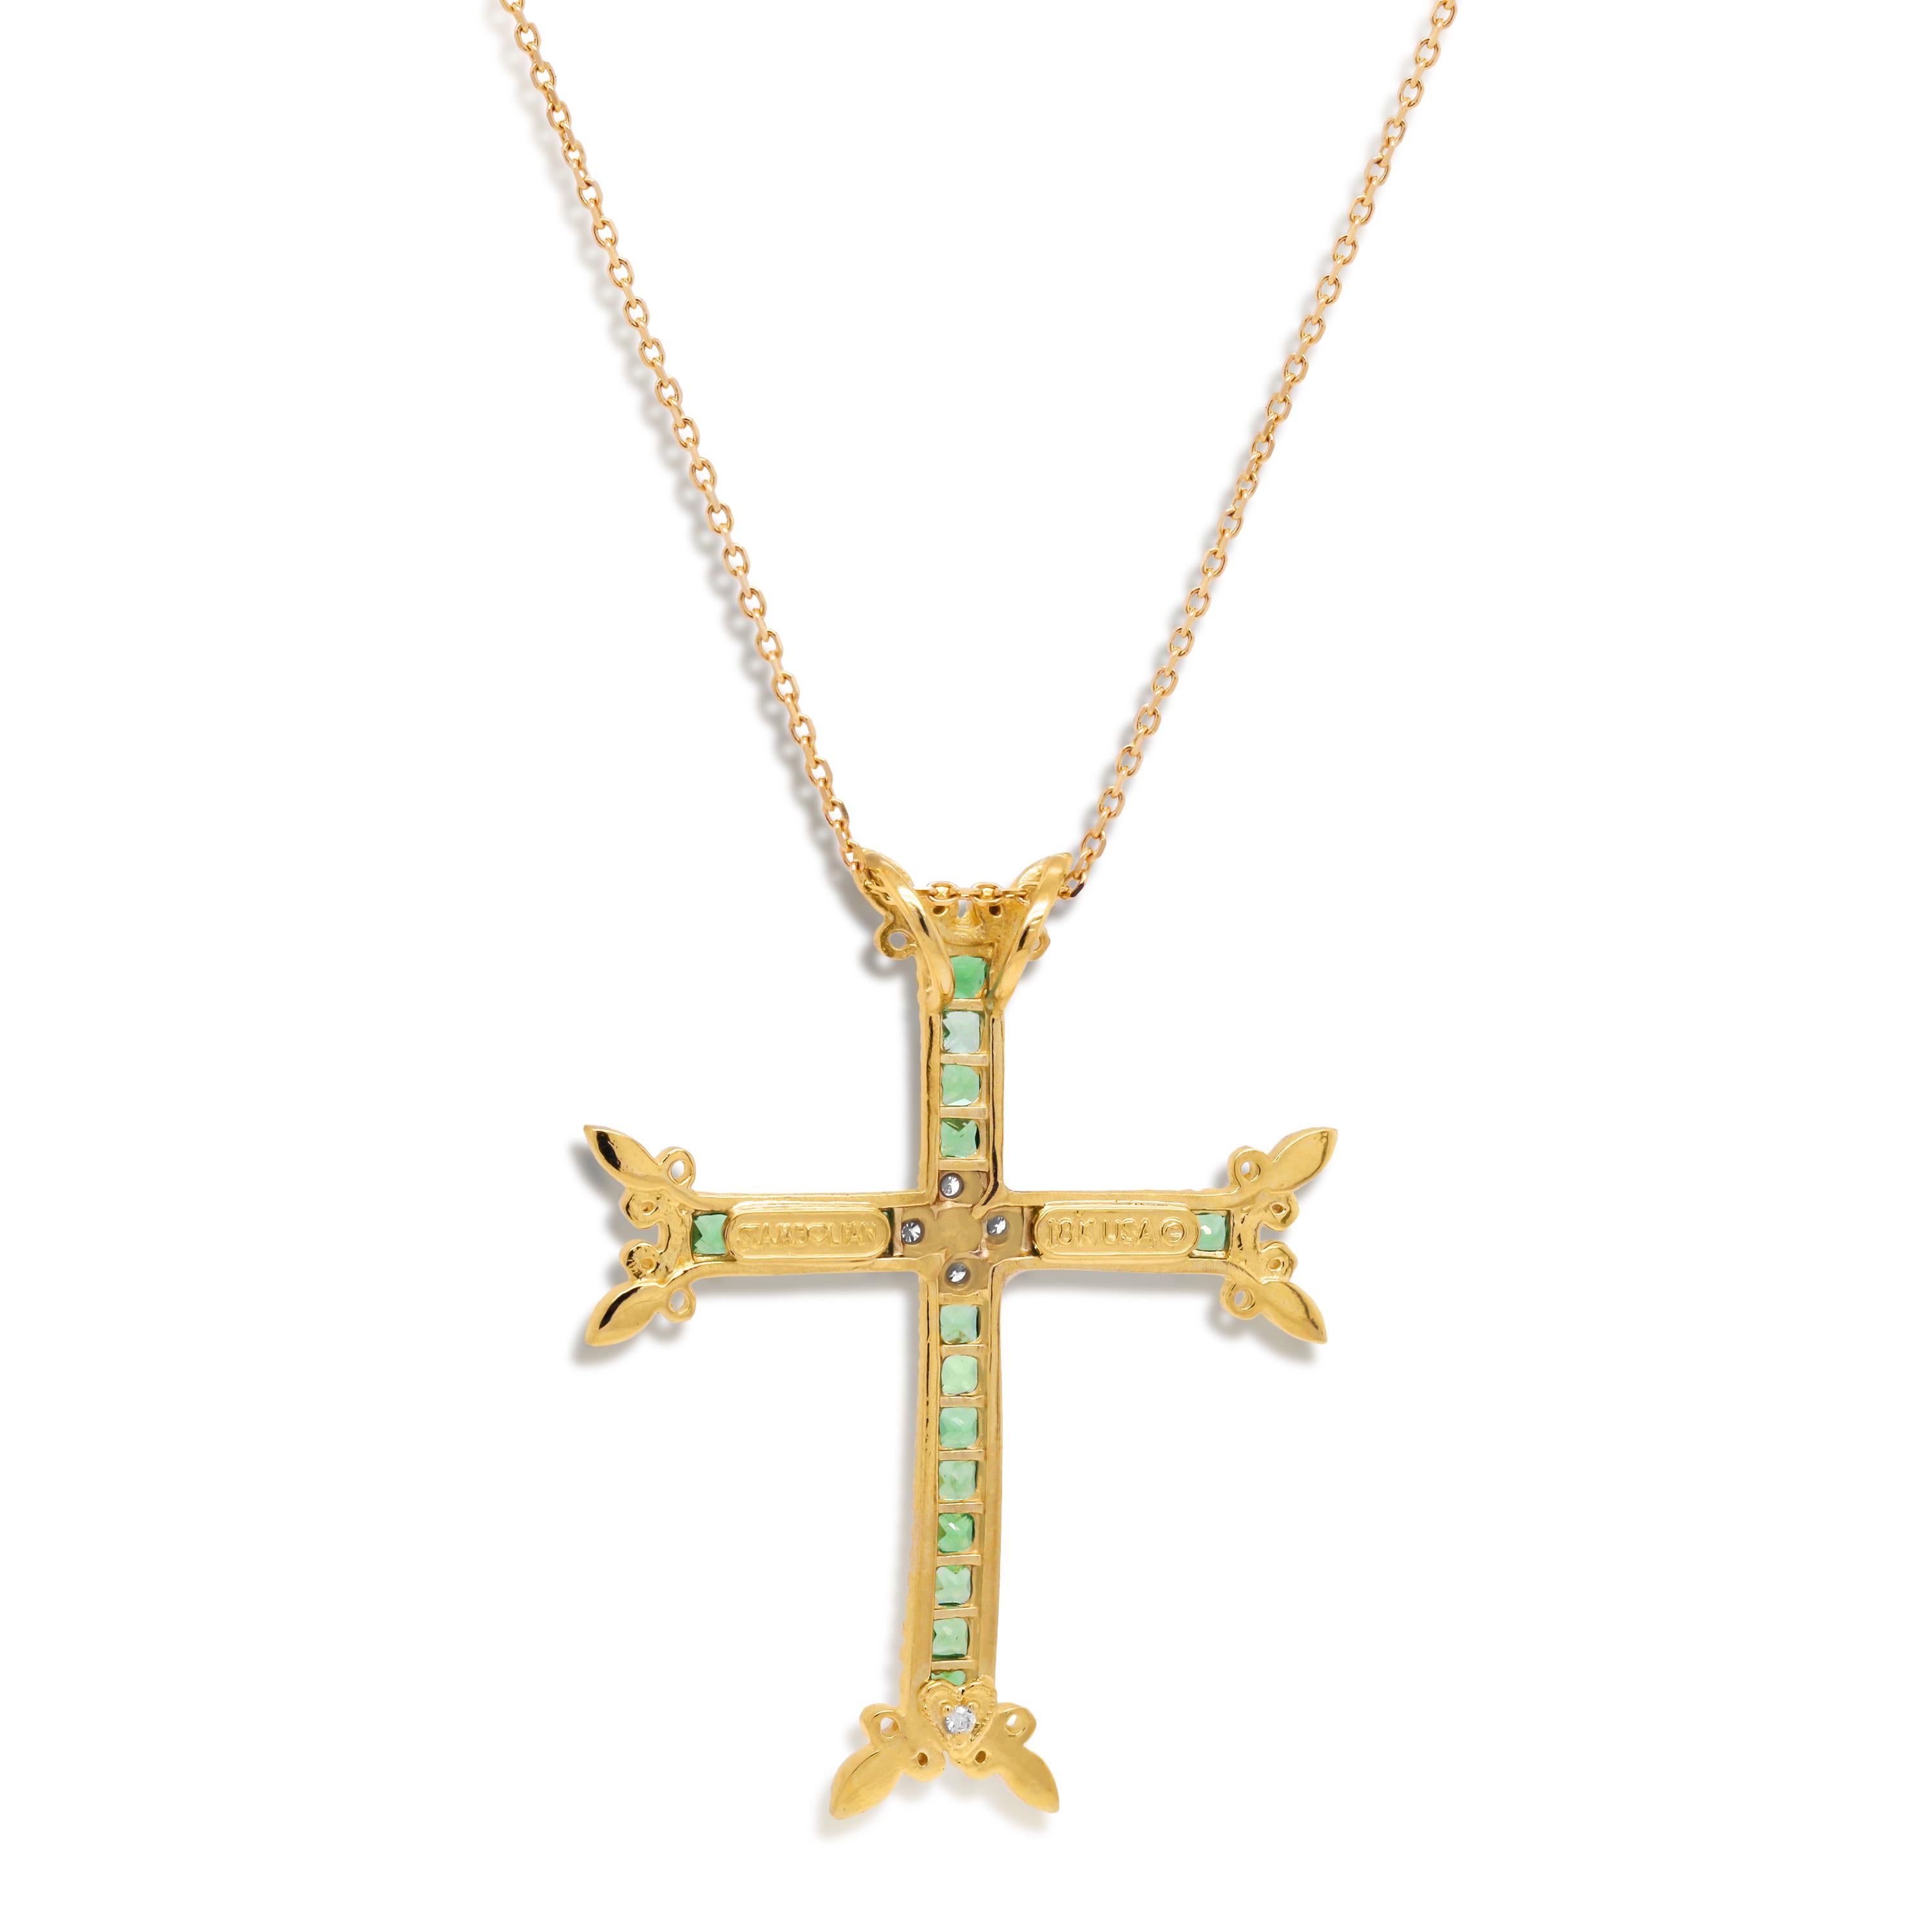 Stambolian 18K Yellow Gold Diamond Princess Cut Tsavorite Cross Pendant Necklace

This unique take on a cross is inspired by the Armenian cross

Apprx. 2.50 carat Tsavorite total weight. Tsavorites are all princess cuts.

Diamonds are set in the